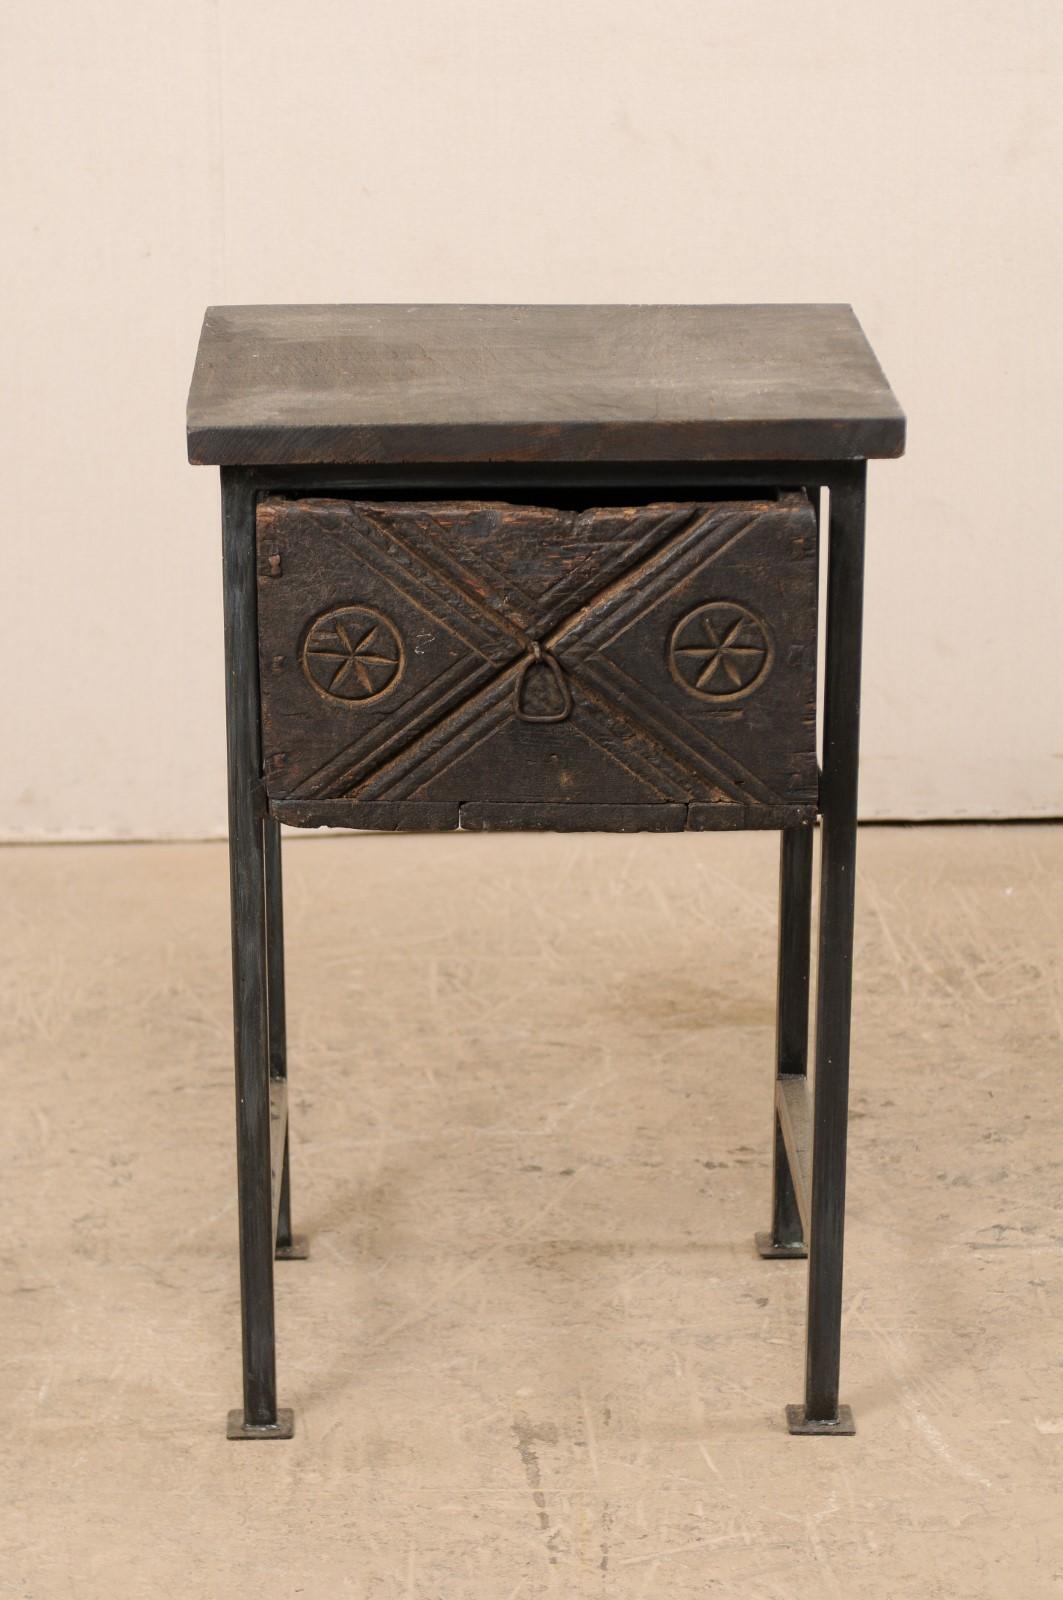 A small-sized side chest with 18th century Spanish door. This unique and custom designed side chest features an 18th century (or earlier) Spanish carved wood drawer, with a reclaimed wood top above, all set within a custom iron base. The drawer